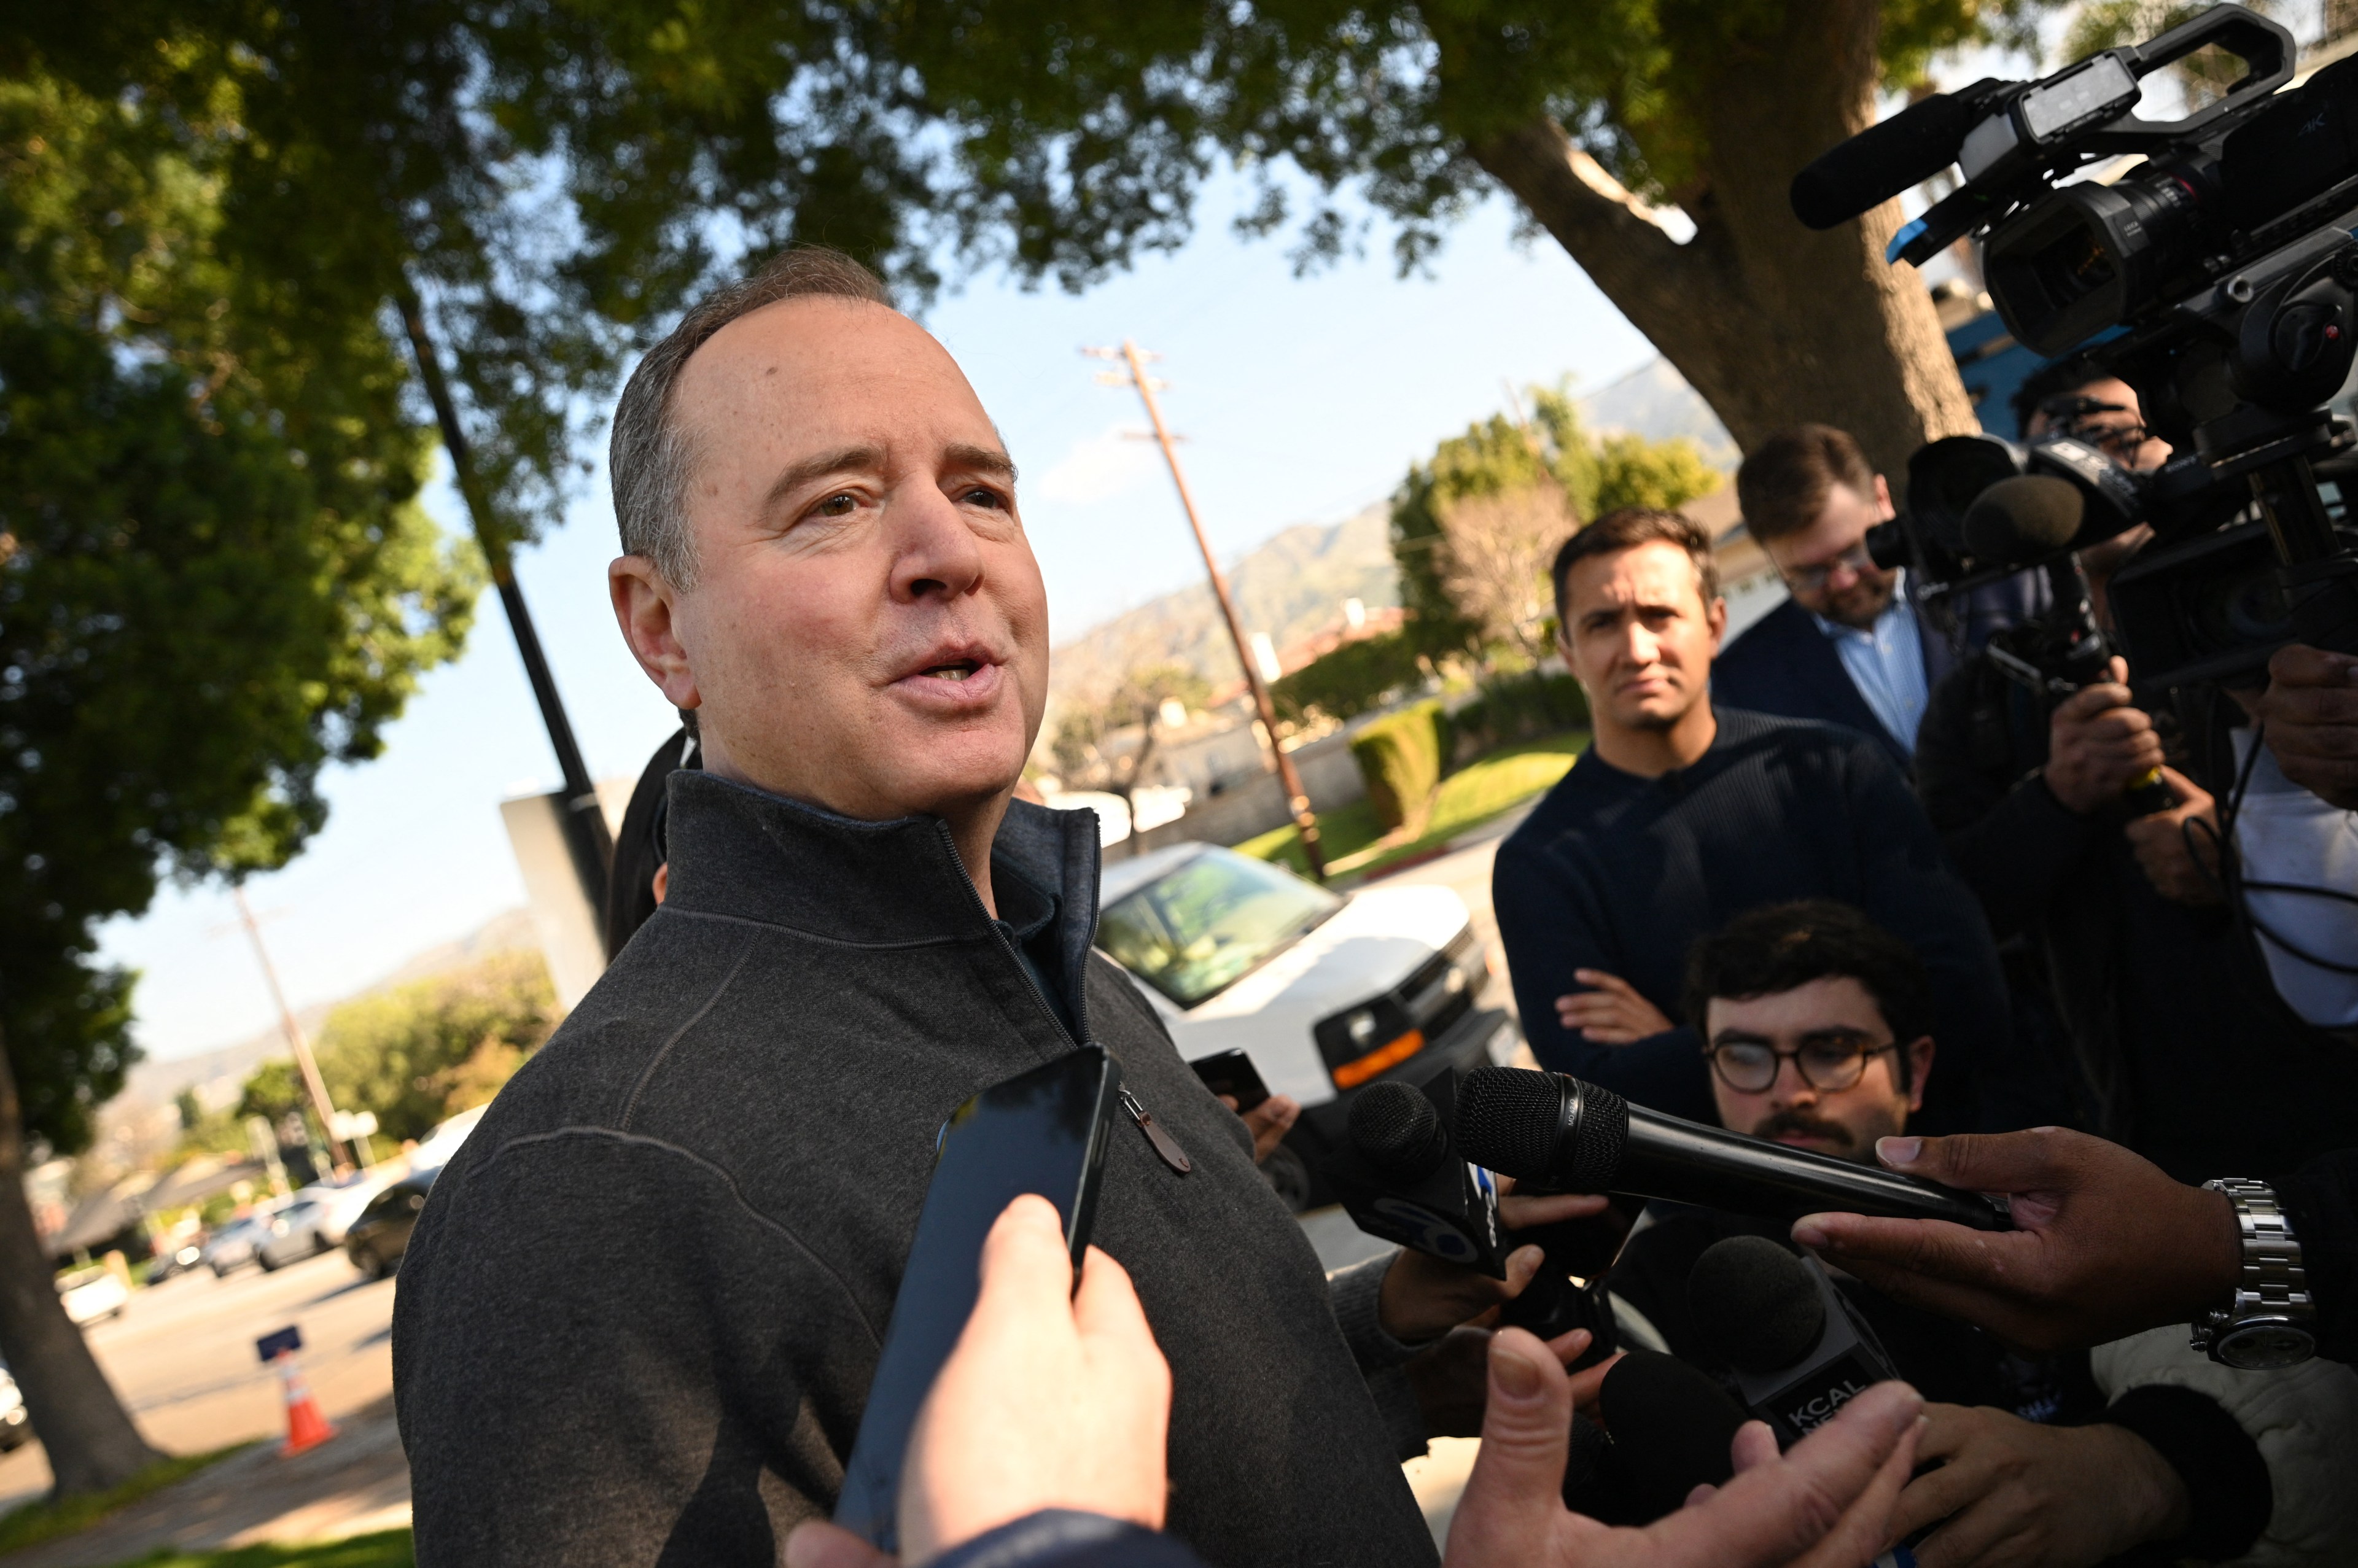 A man speaks to reporters holding microphones, with cameras and people behind him.